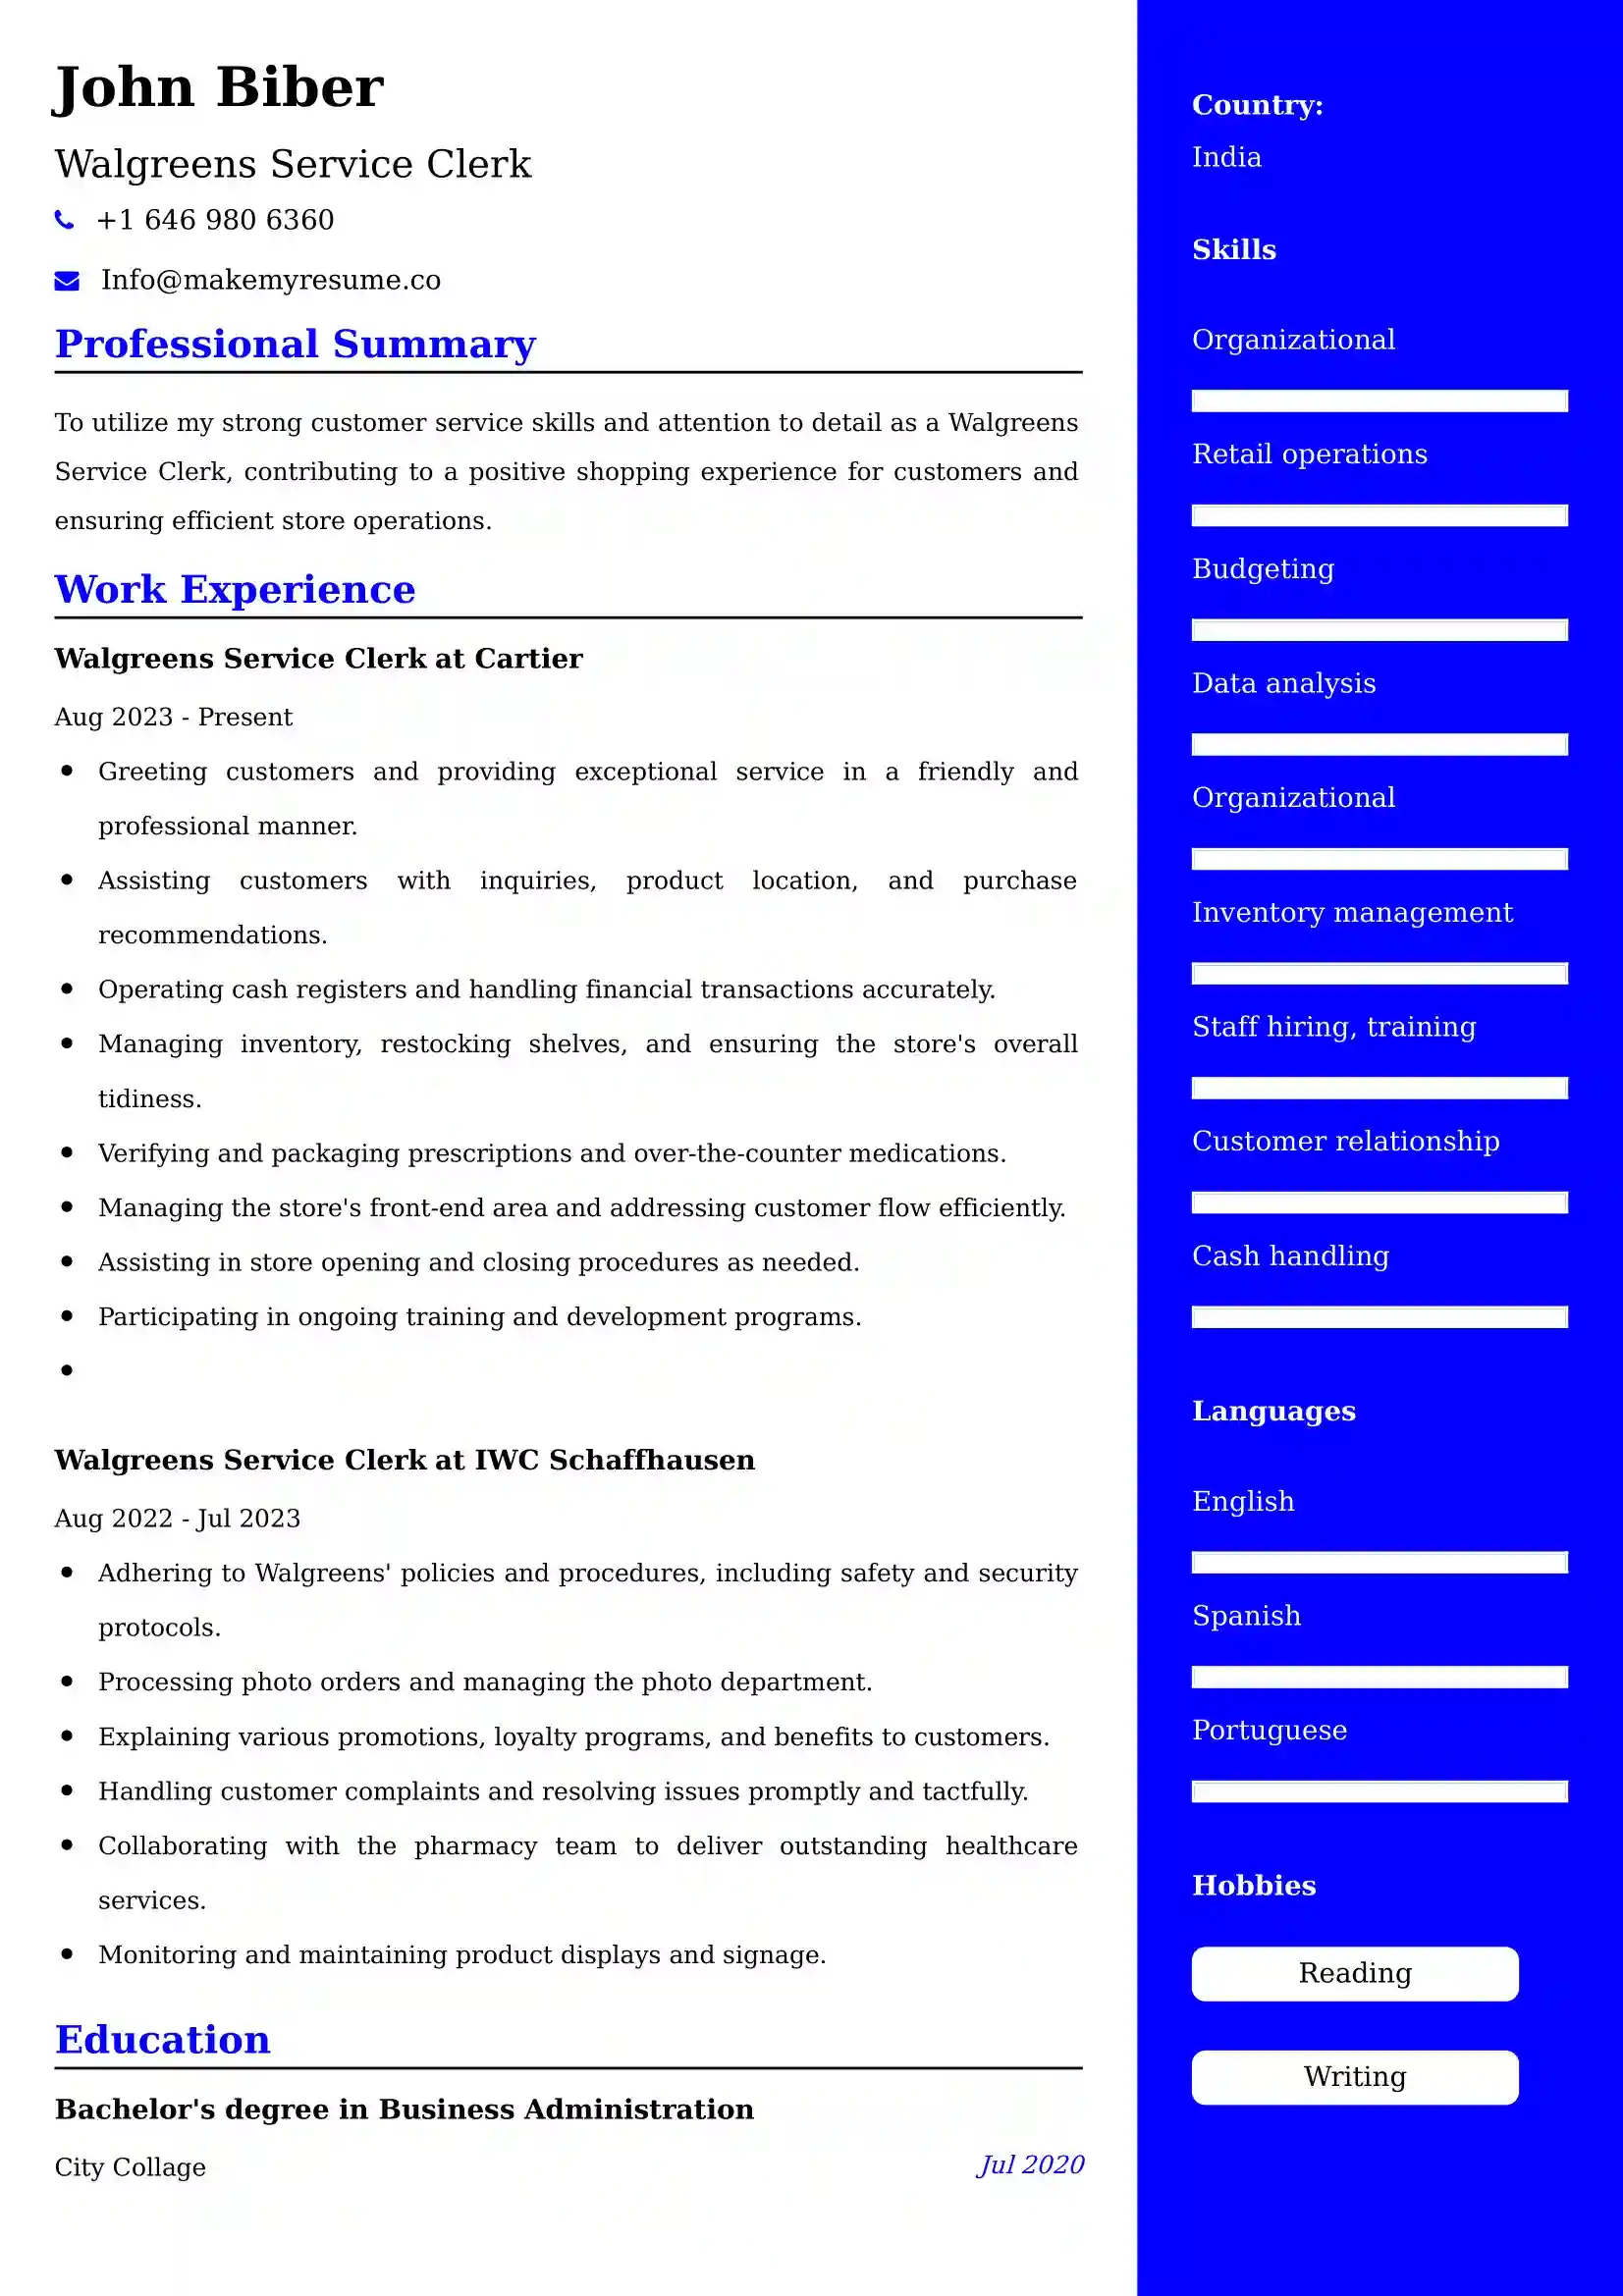 Walgreens Service Clerk Resume Examples - UK Format, Latest Template.